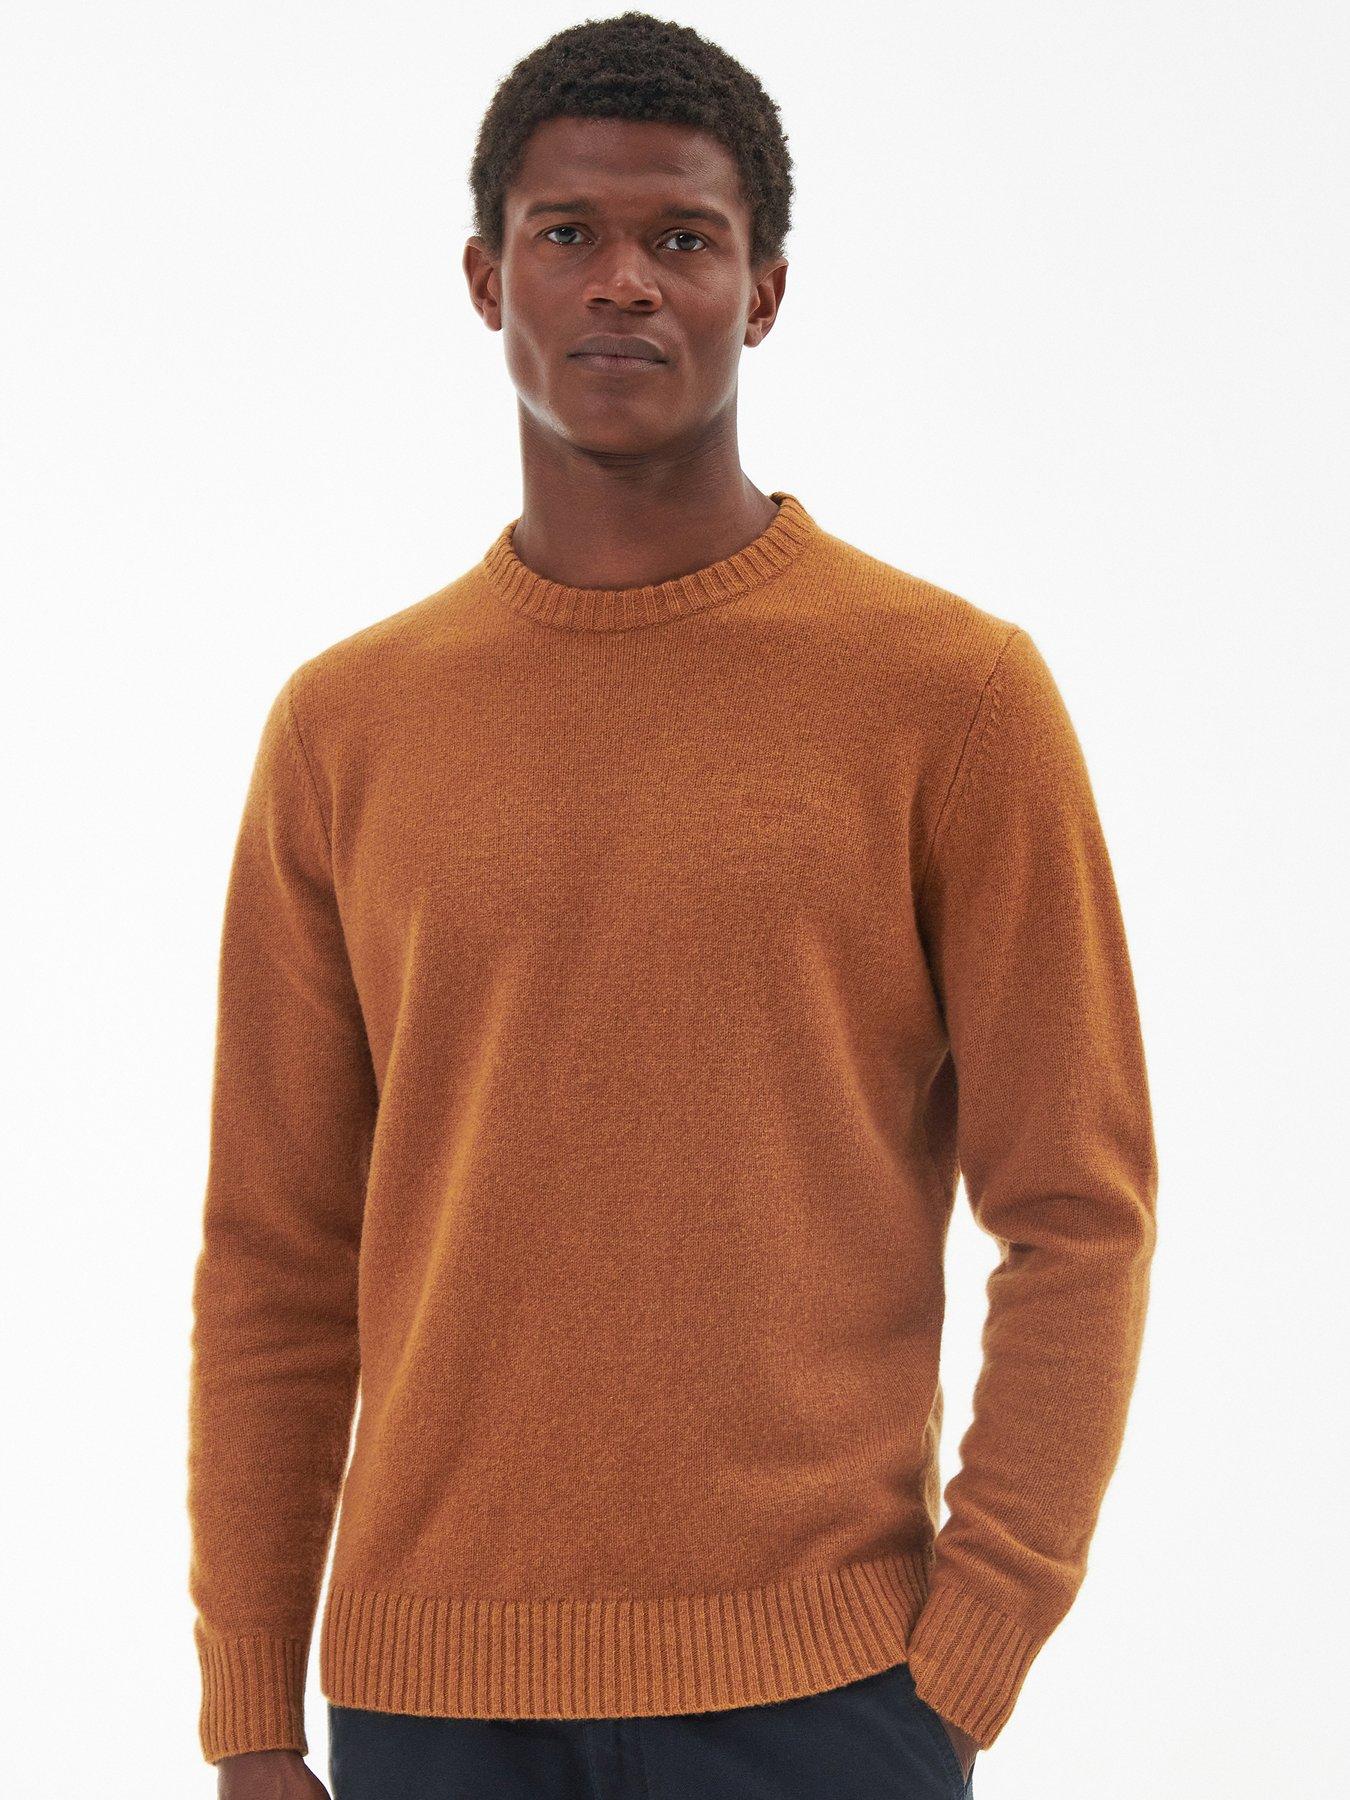 Buy Burgundy Textured Crew Neck Jumper M, Jumpers and cardigans